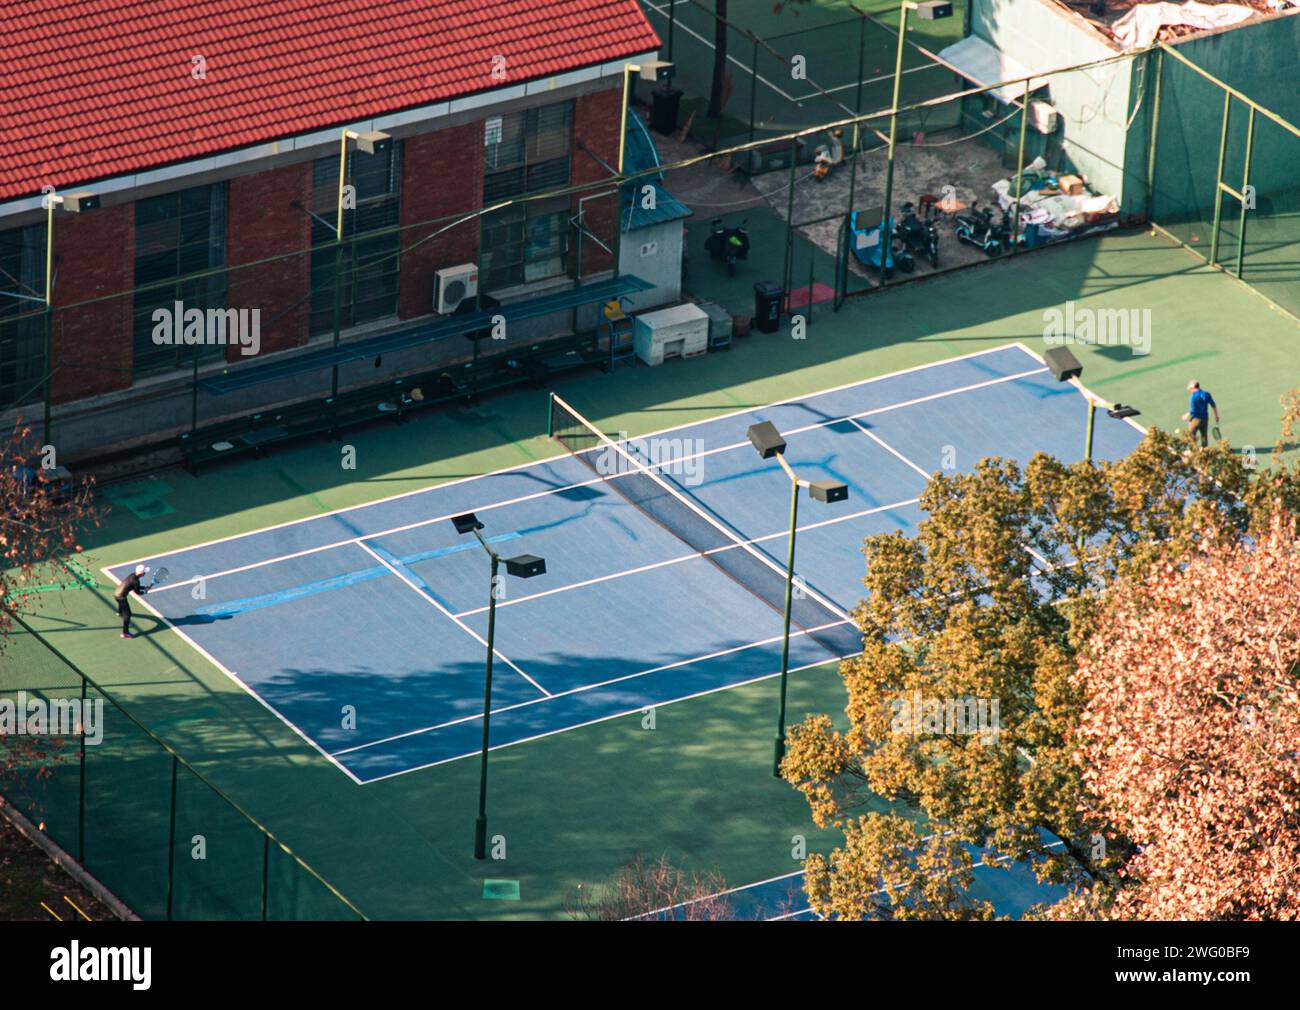 Two individuals engage in a friendly game of tennis on a court beneath a towering architectural structure Stock Photo